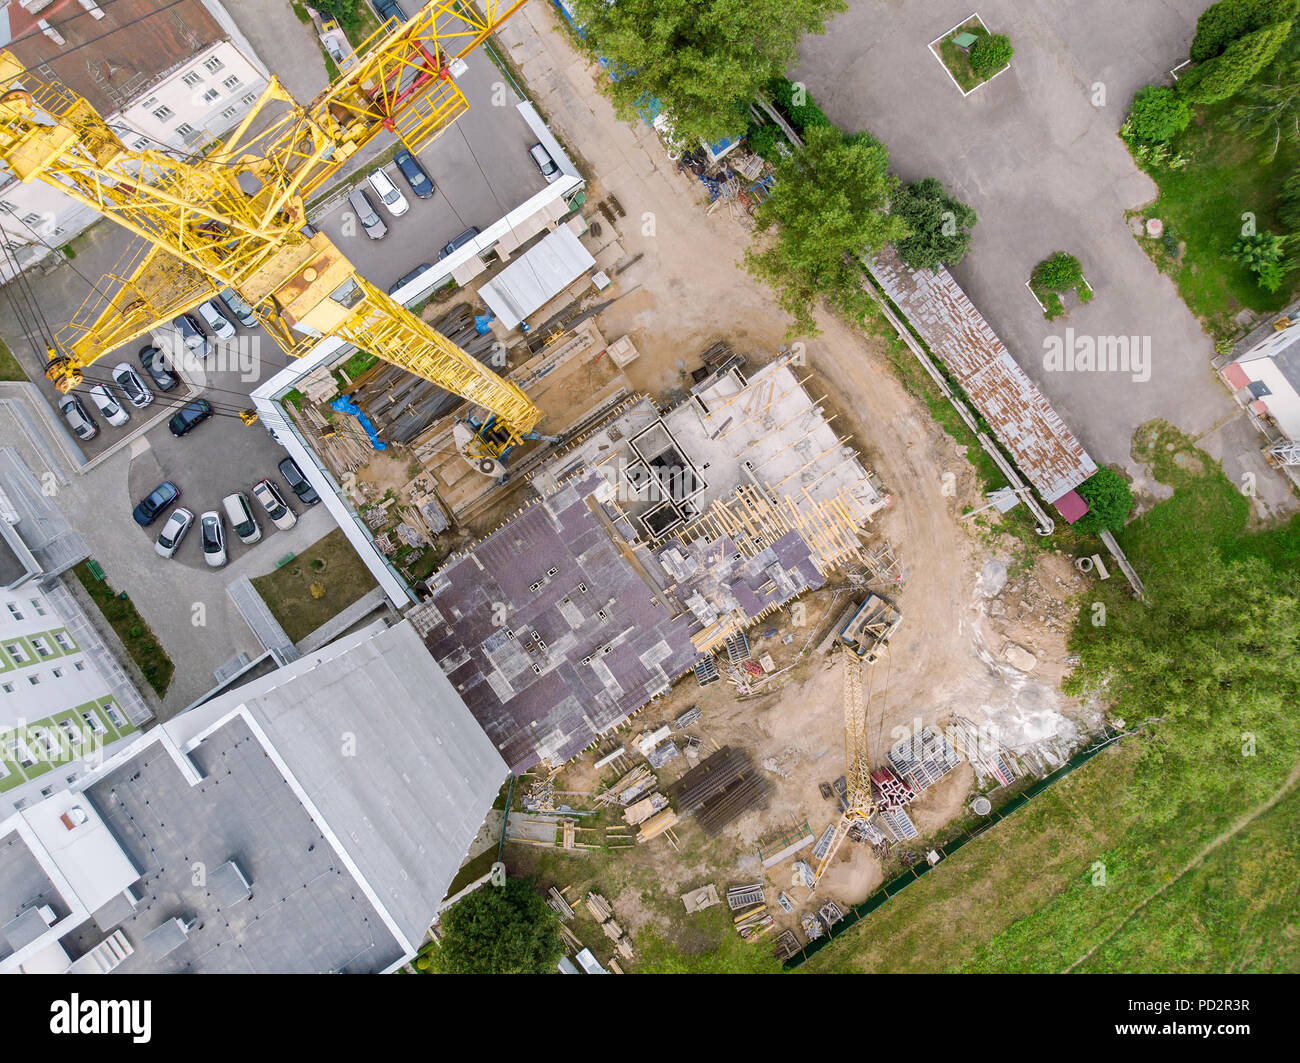 construction site in progress. top aerial view of building under construction and tower crane Stock Photo